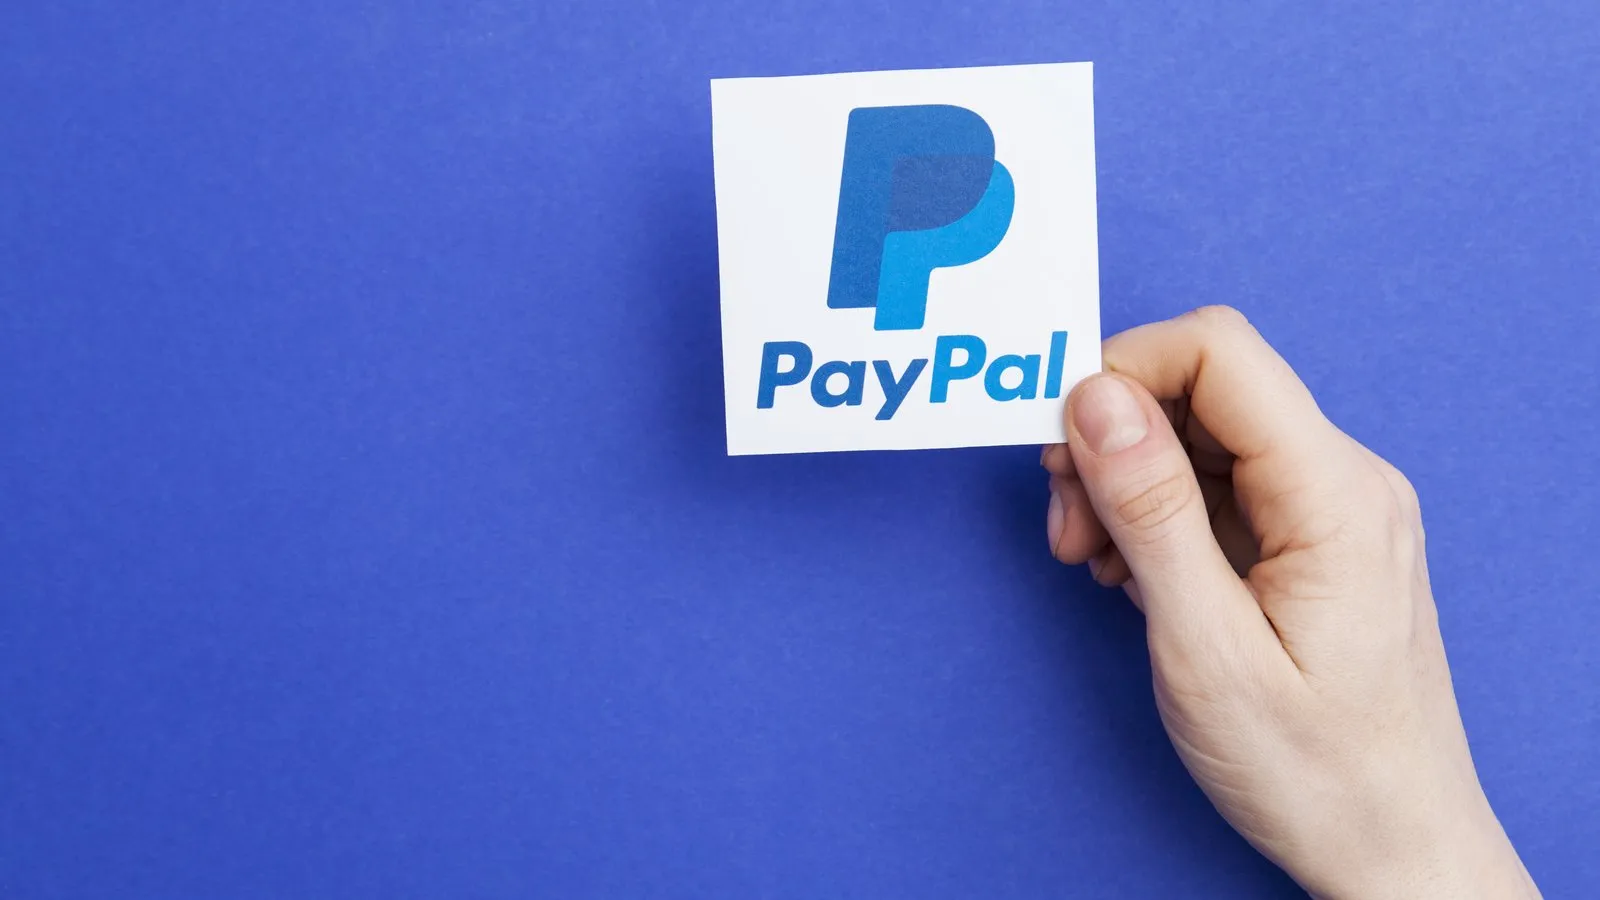 PayPal's logo. Image: Shutterstock